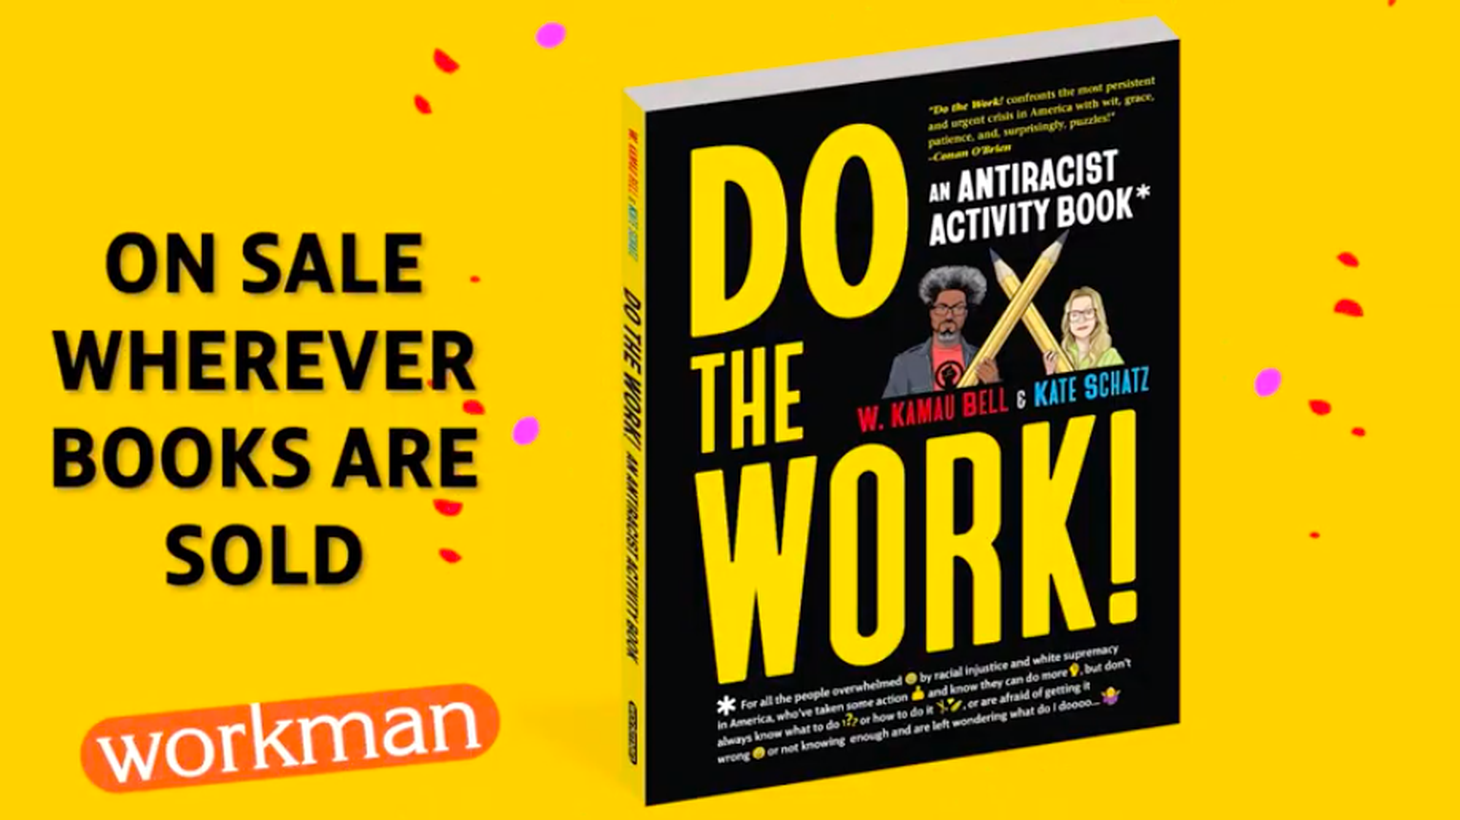 “Do The Work! An Antiracist Activity Book” is an interactive book to help people understand and dismantle systemic racism.